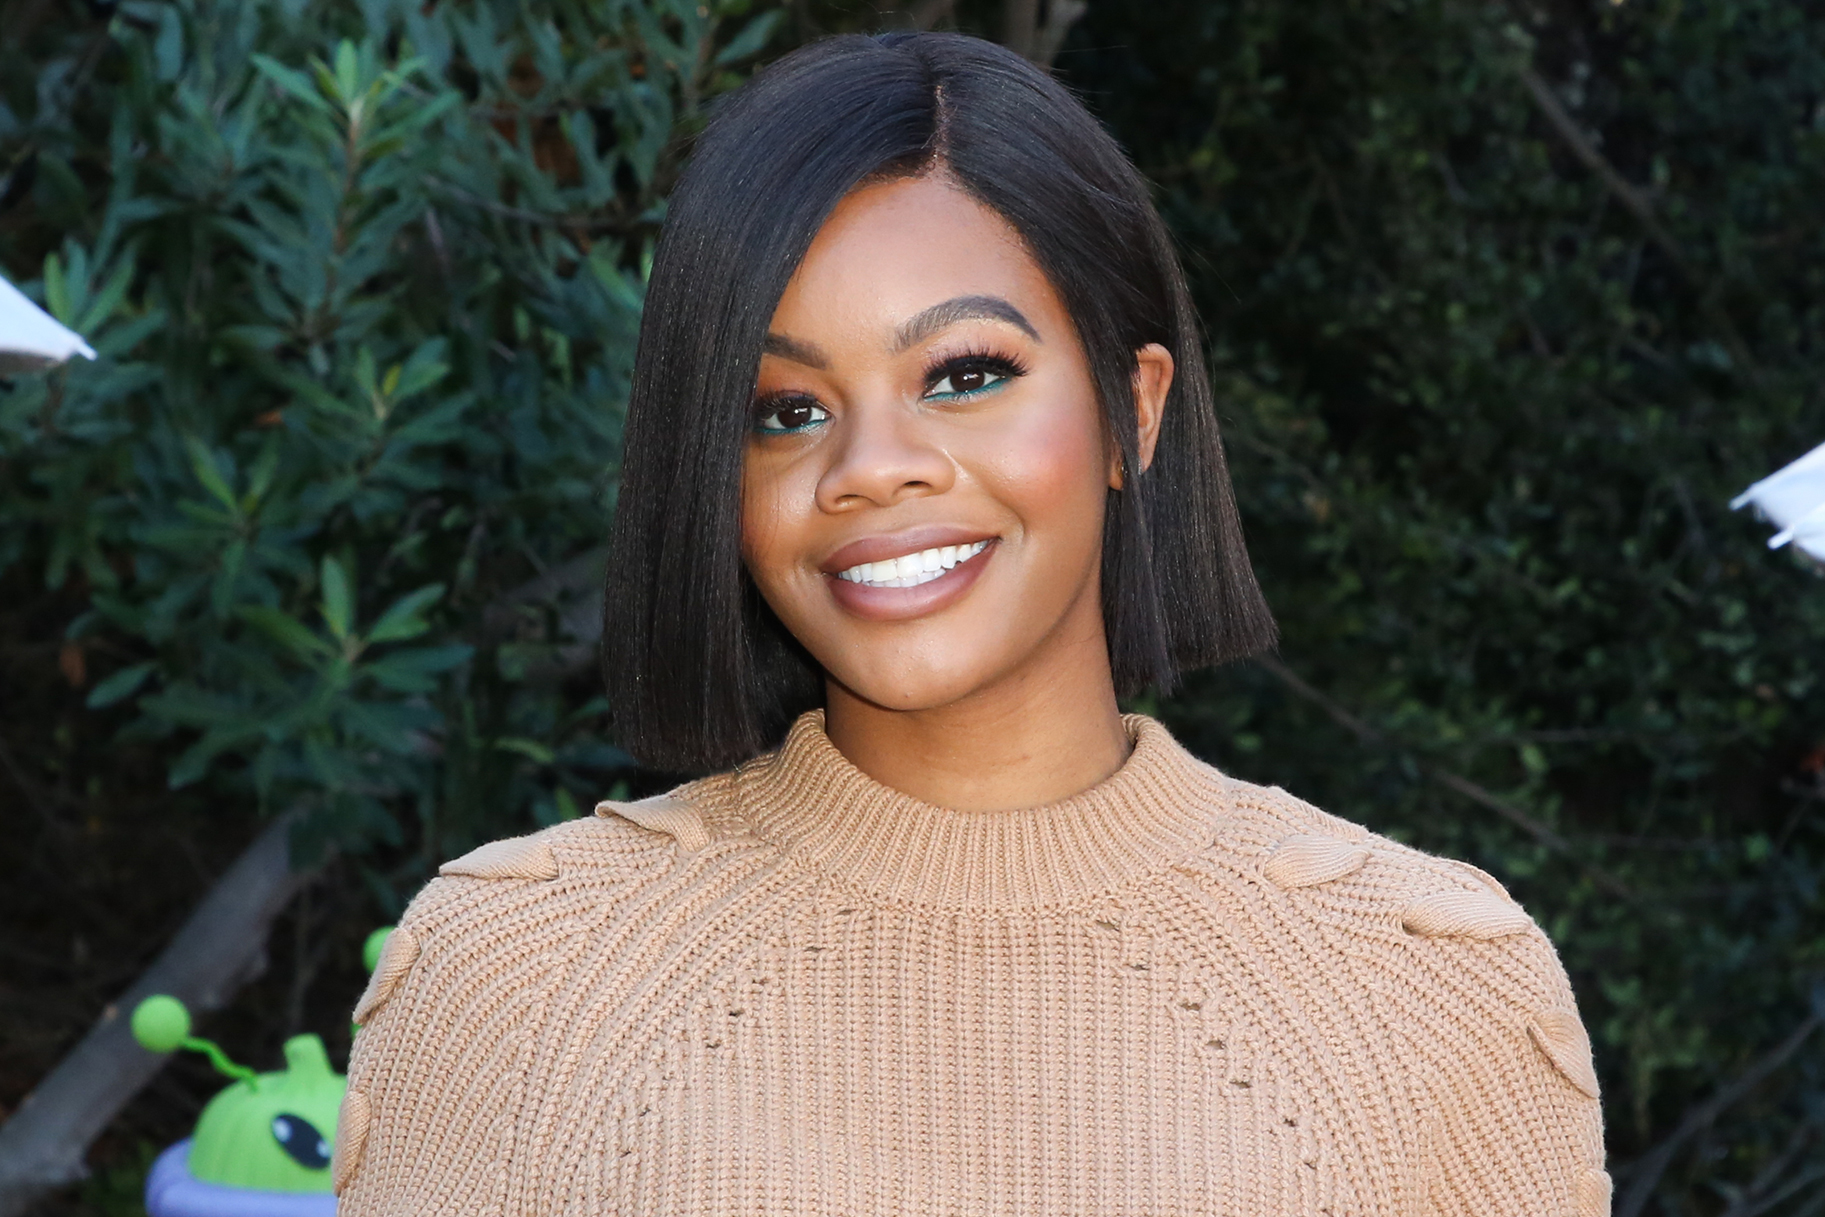 Gabby Douglas smiles in a tan sweater during Hallmark's "Home & Family" event